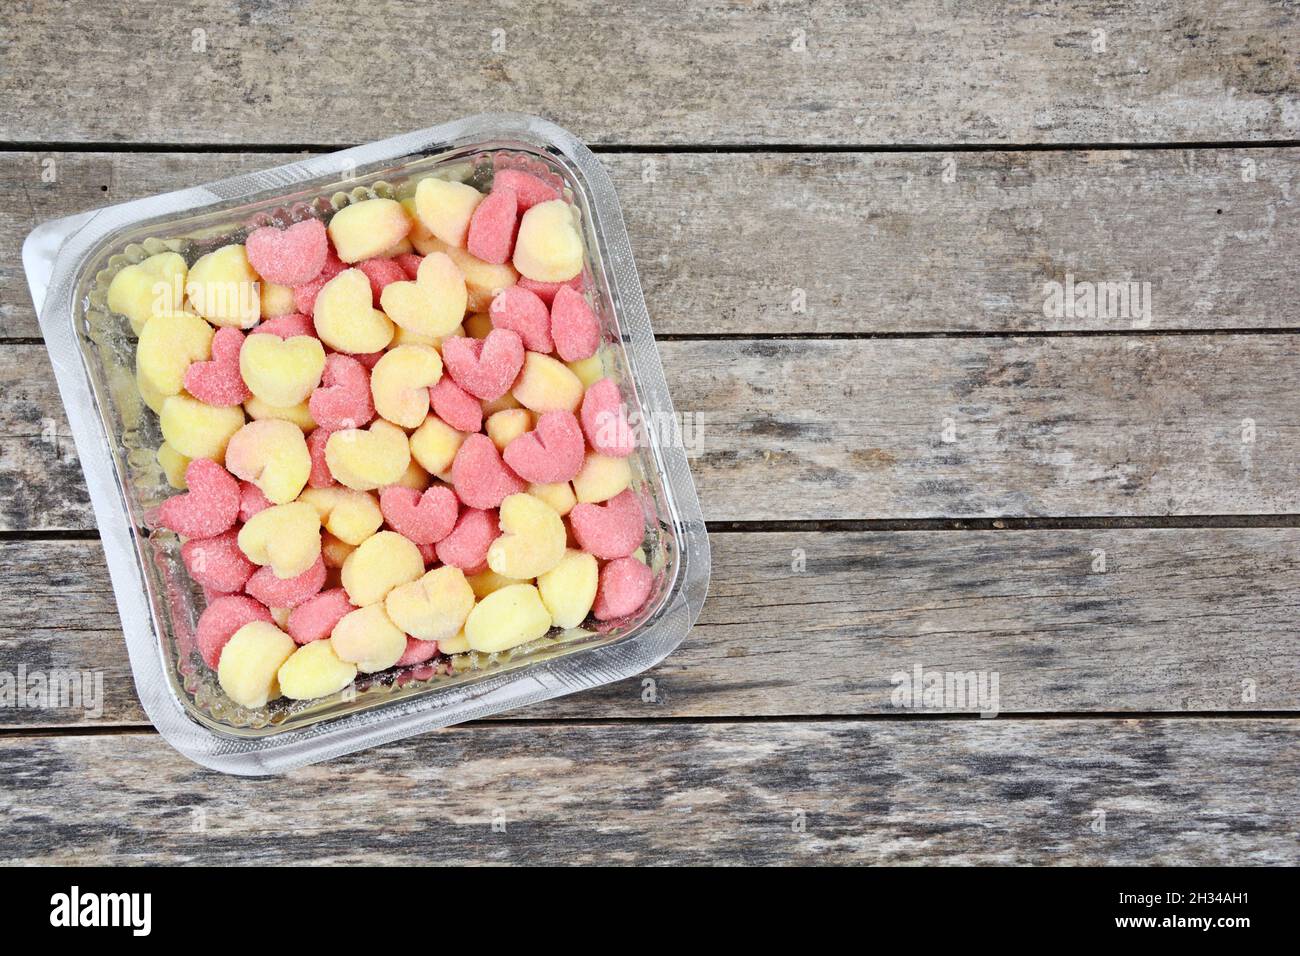 Colorful gnocchi in a plastic receipe on wooden table Stock Photo